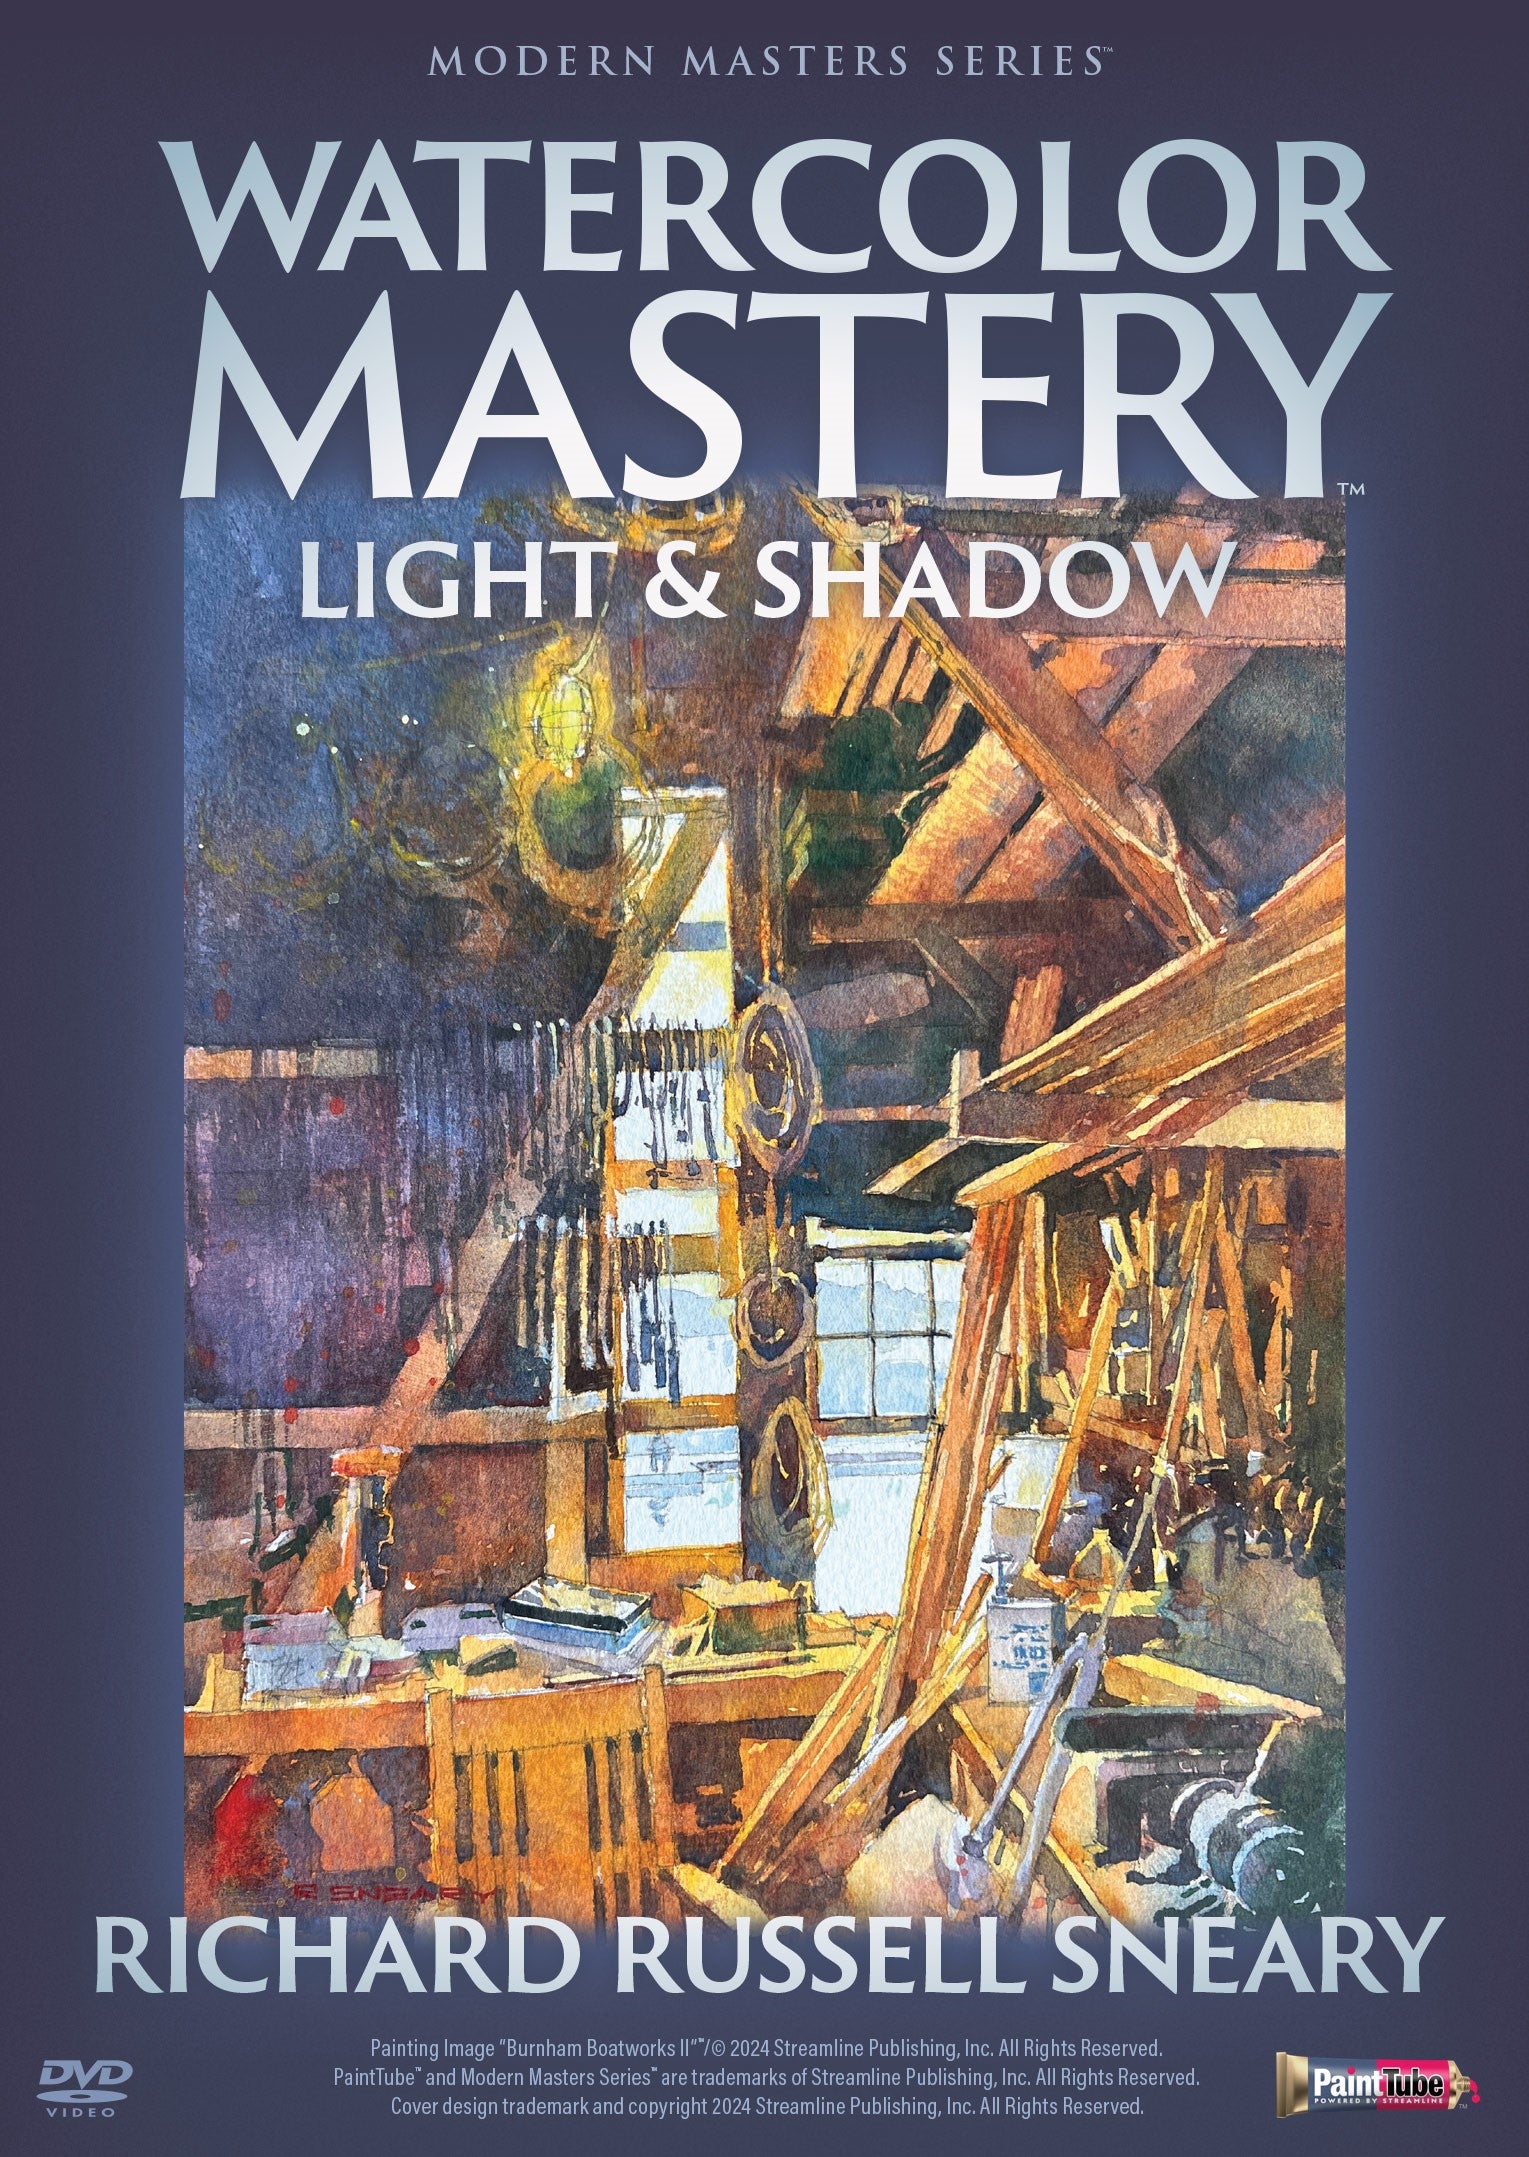 Richard Russell Sneary: Watercolor Mastery - Light & Shadow